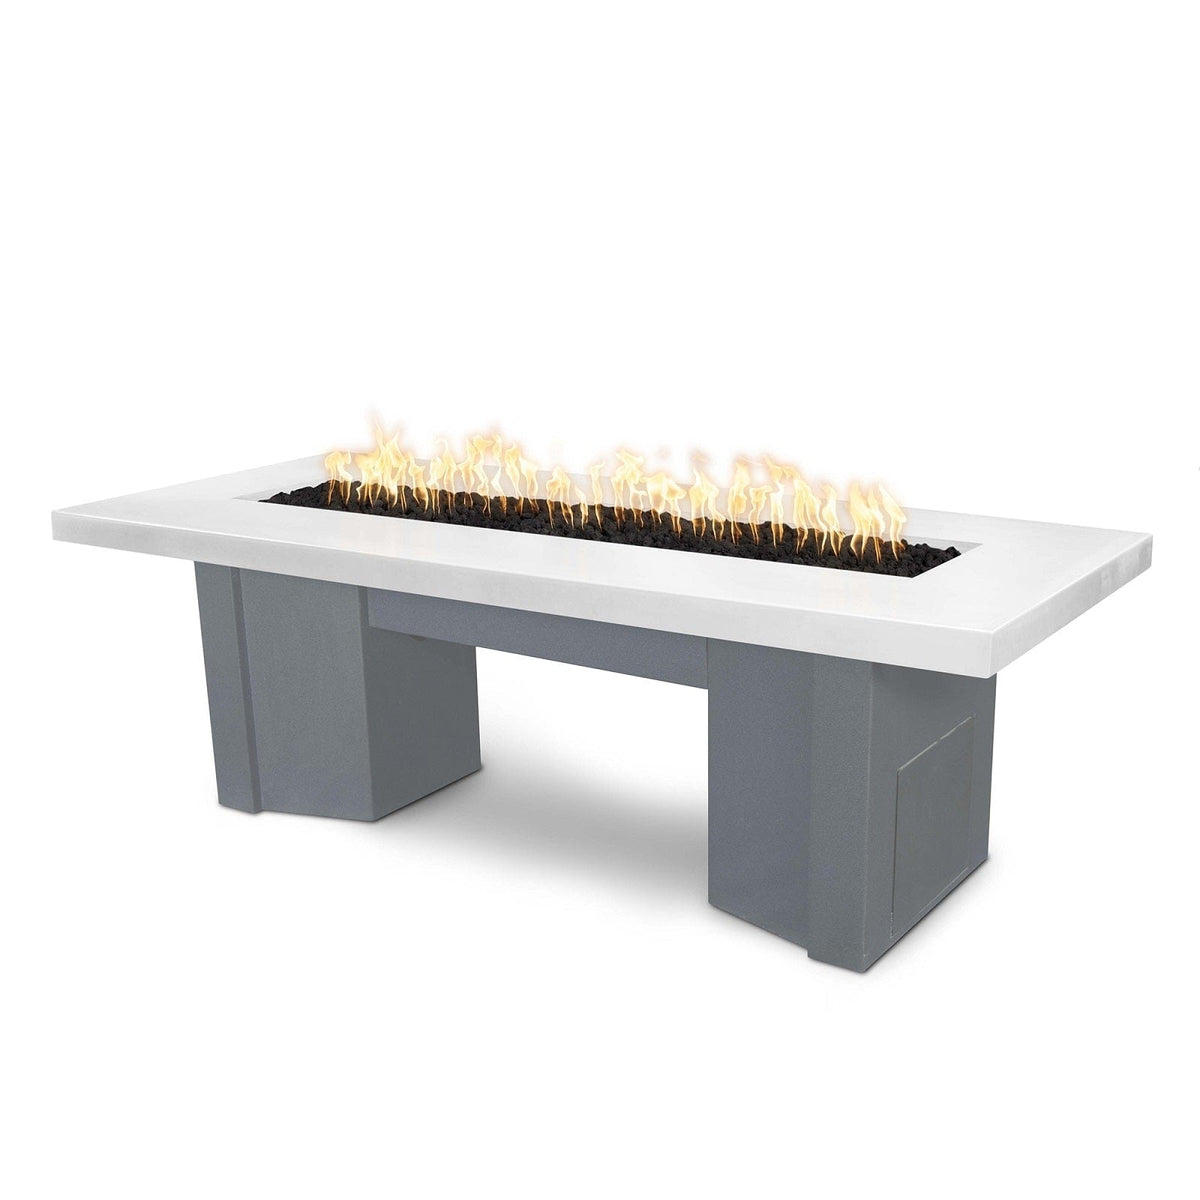 The Outdoor Plus Fire Features Limestone (-LIM) / Gray Powder Coated Steel (-GRY) The Outdoor Plus 60&quot; Alameda Fire Table Smooth Concrete in Natural Gas - Flame Sense System with Push Button Spark Igniter / OPT-ALMGFRC60FSEN-NG